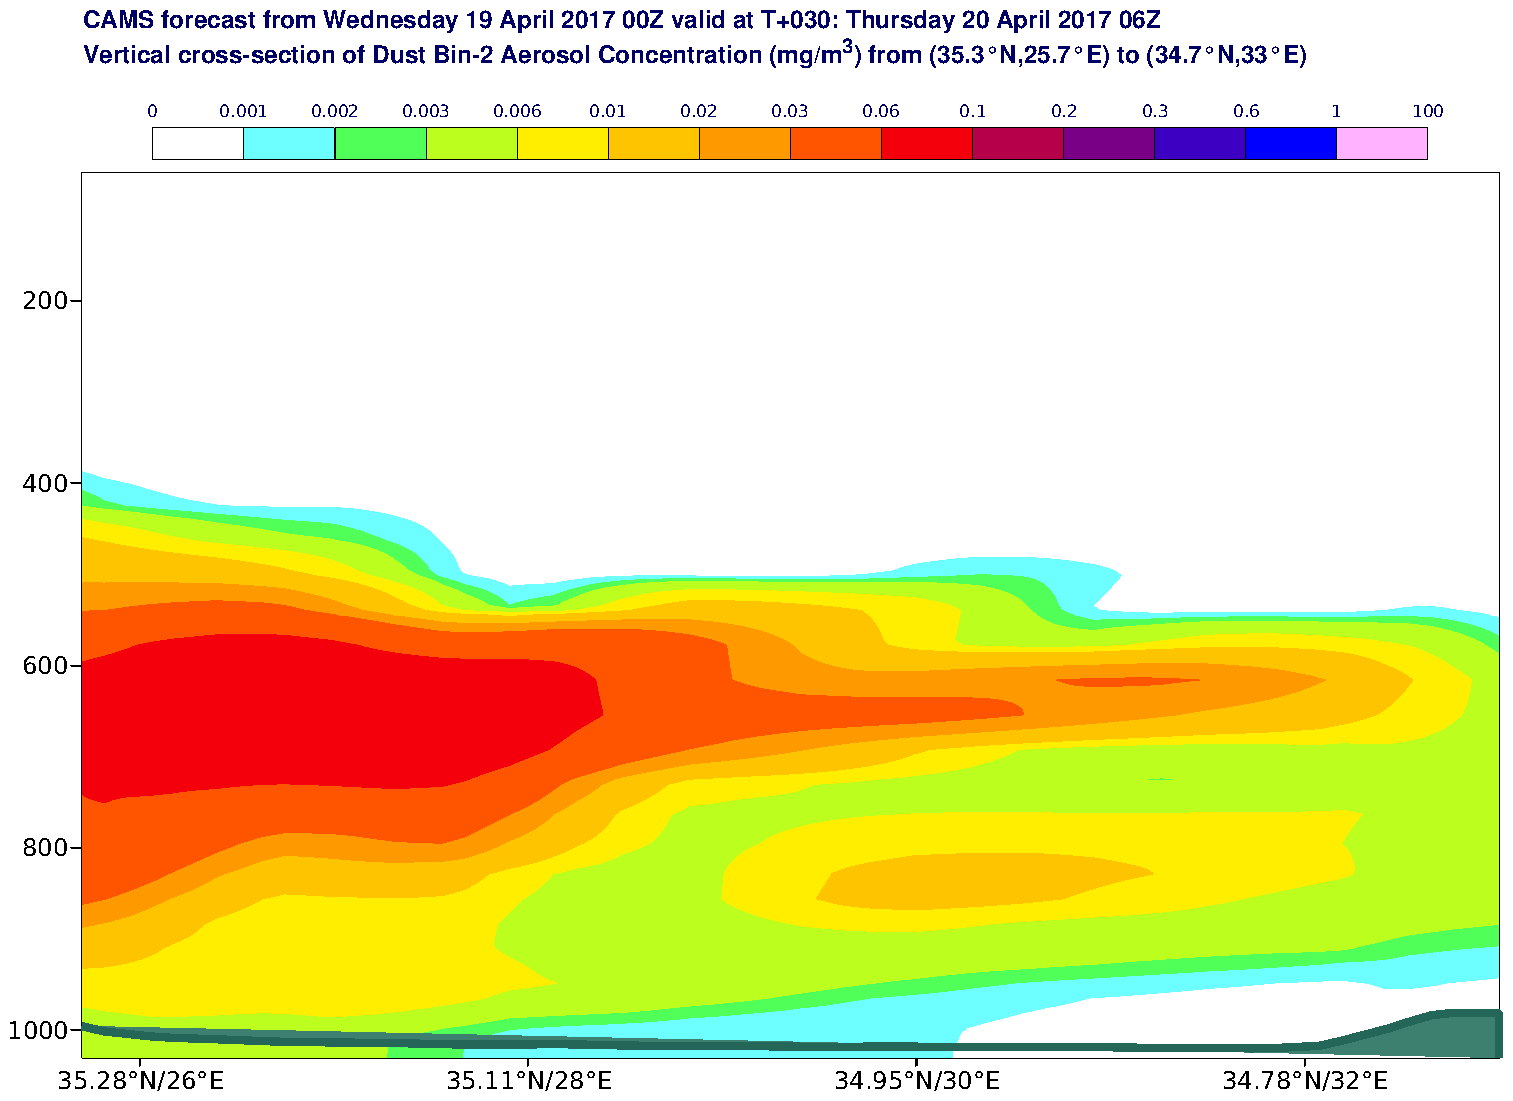 Vertical cross-section of Dust Bin-2 Aerosol Concentration (mg/m3) valid at T30 - 2017-04-20 06:00